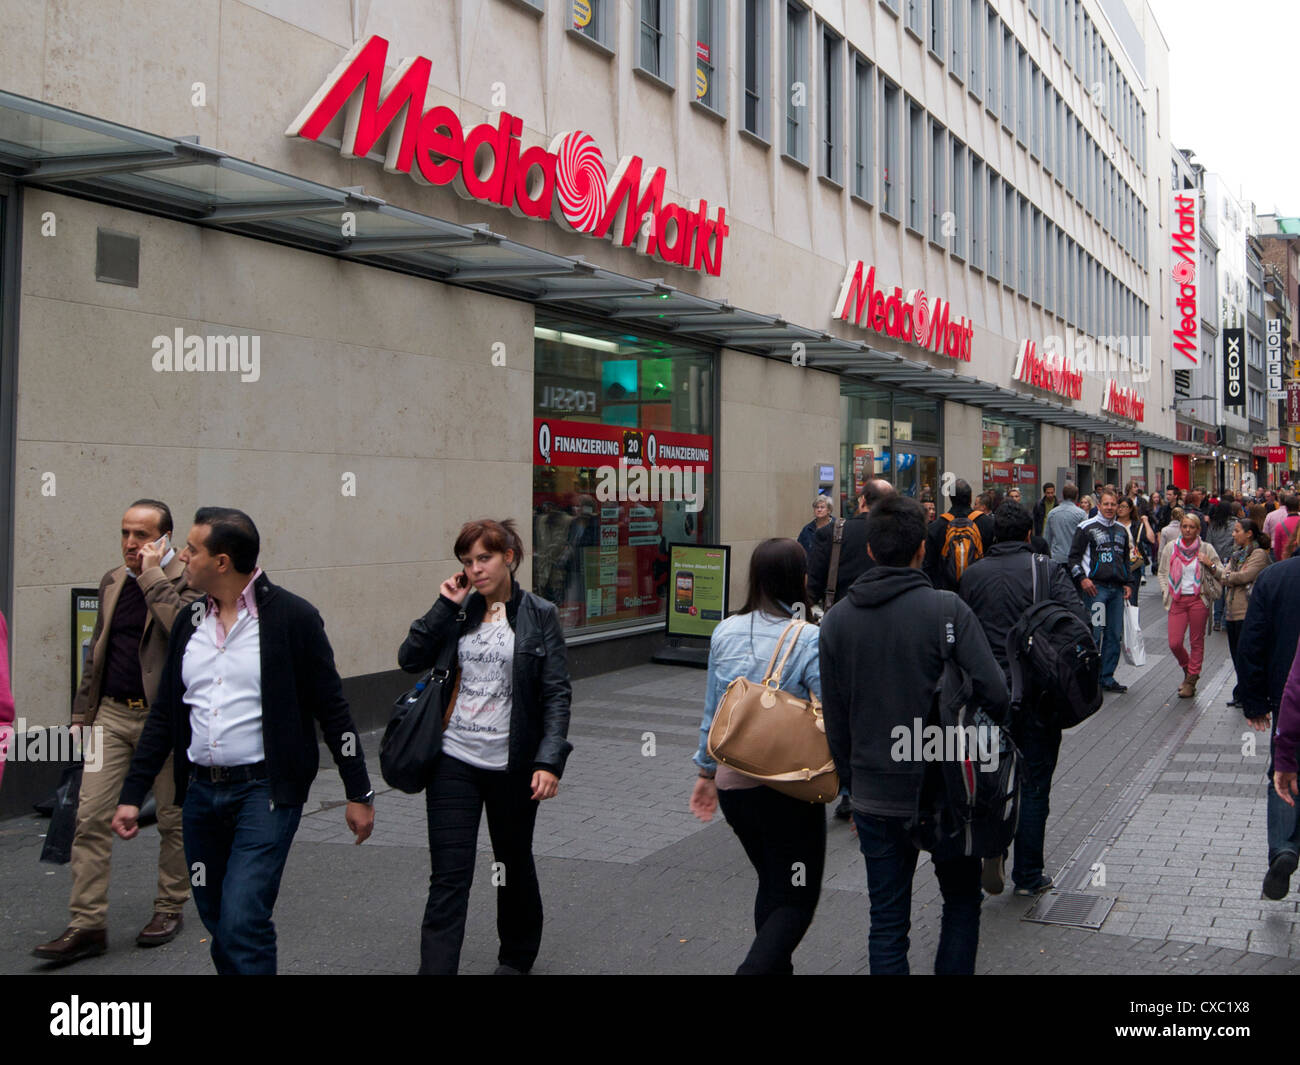 Media Markt store, one of the largest European electronics retail chains, in Cologne, Germany. Stock Photo